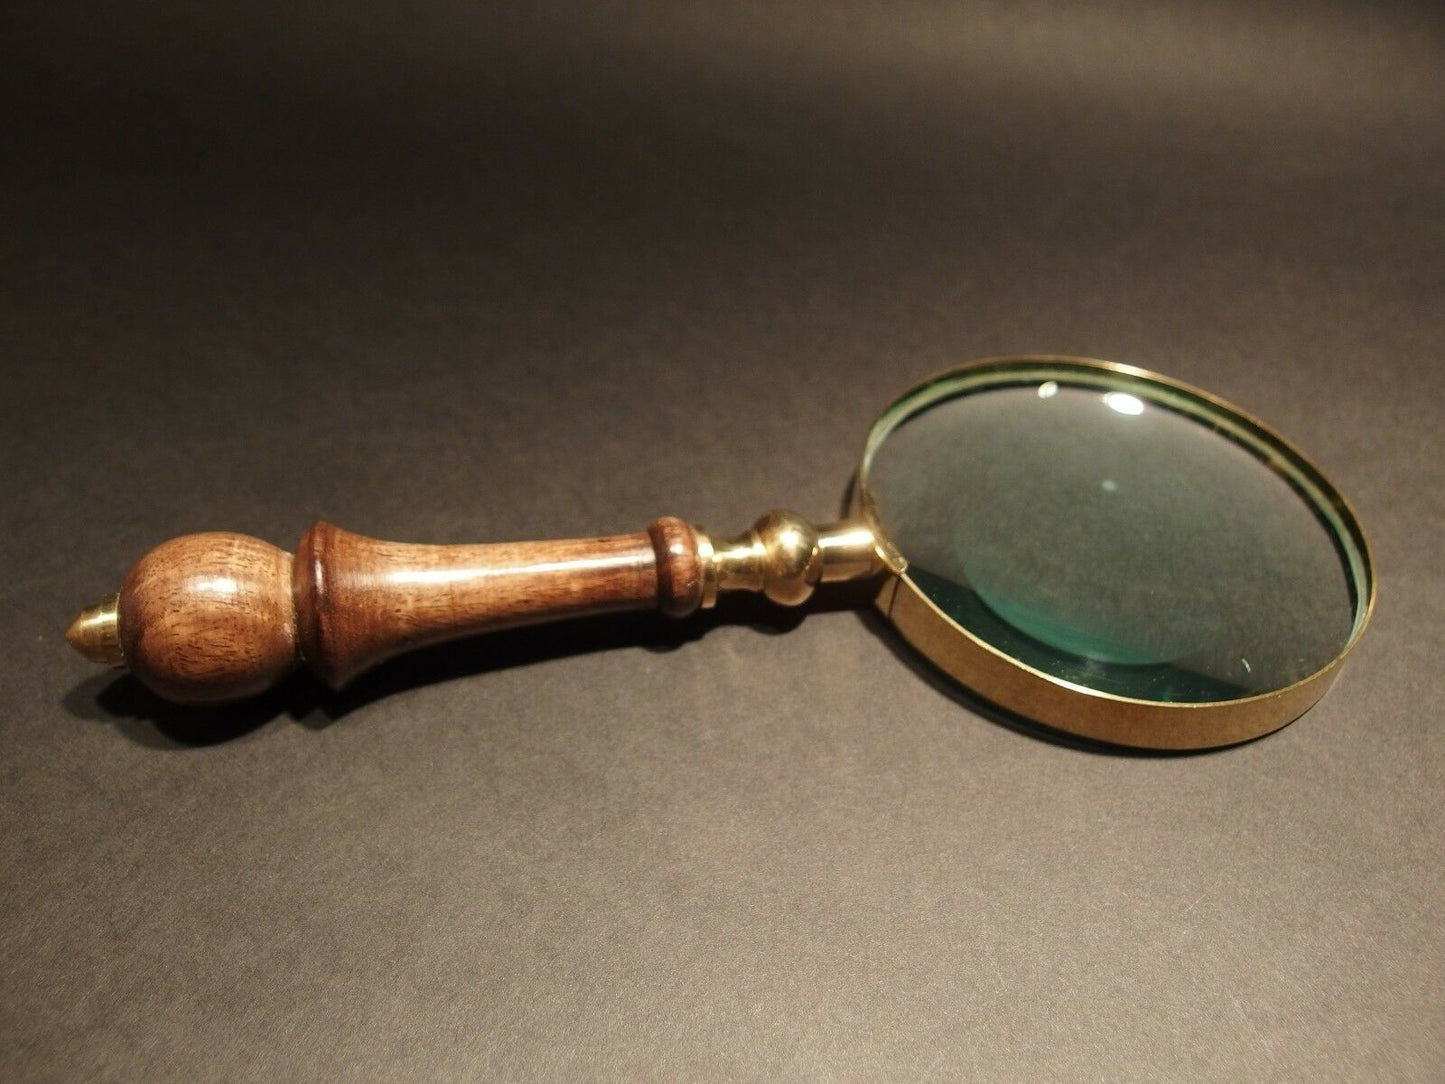 Antique Style Magnifying Glass w Wood Turned Handle - Early Home Decor